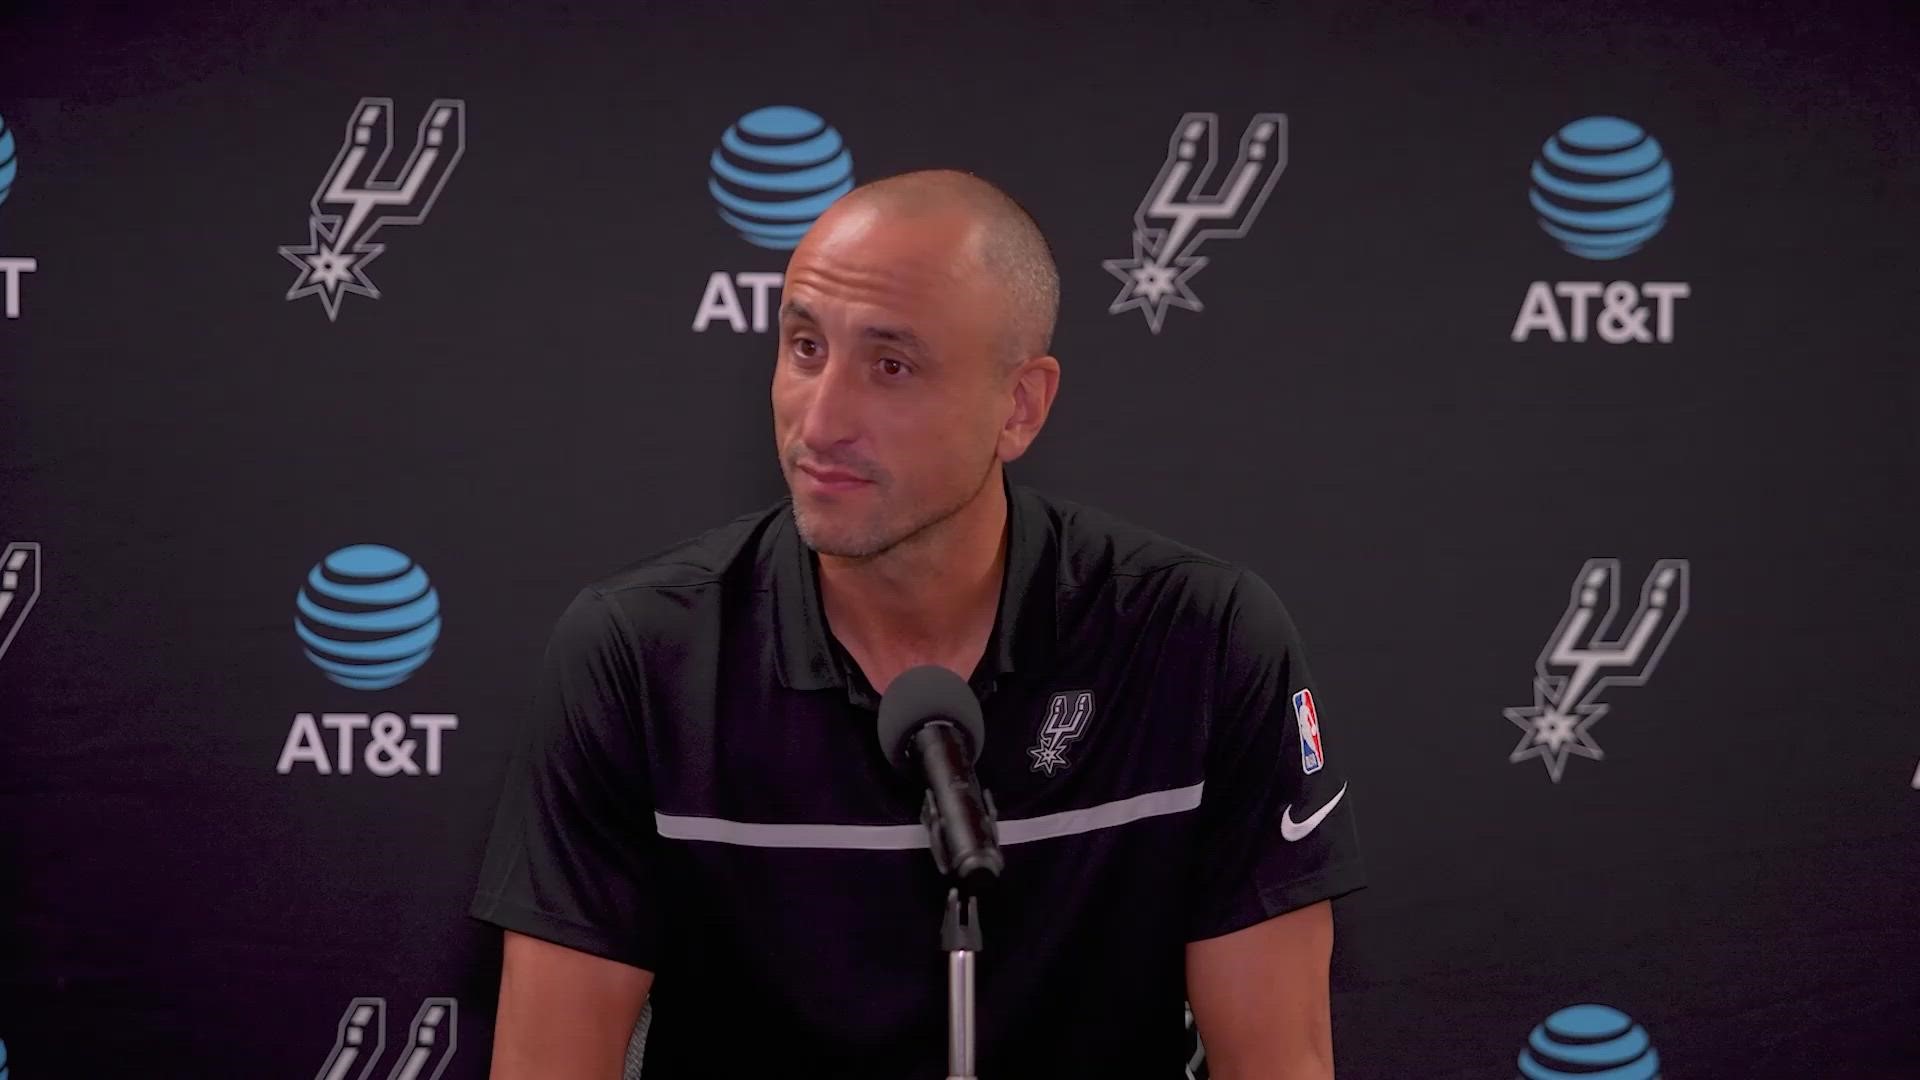 Ginobili recalled knowing nothing about San Antonio, but quickly feeling the heat outside and the appreciation from the fans.